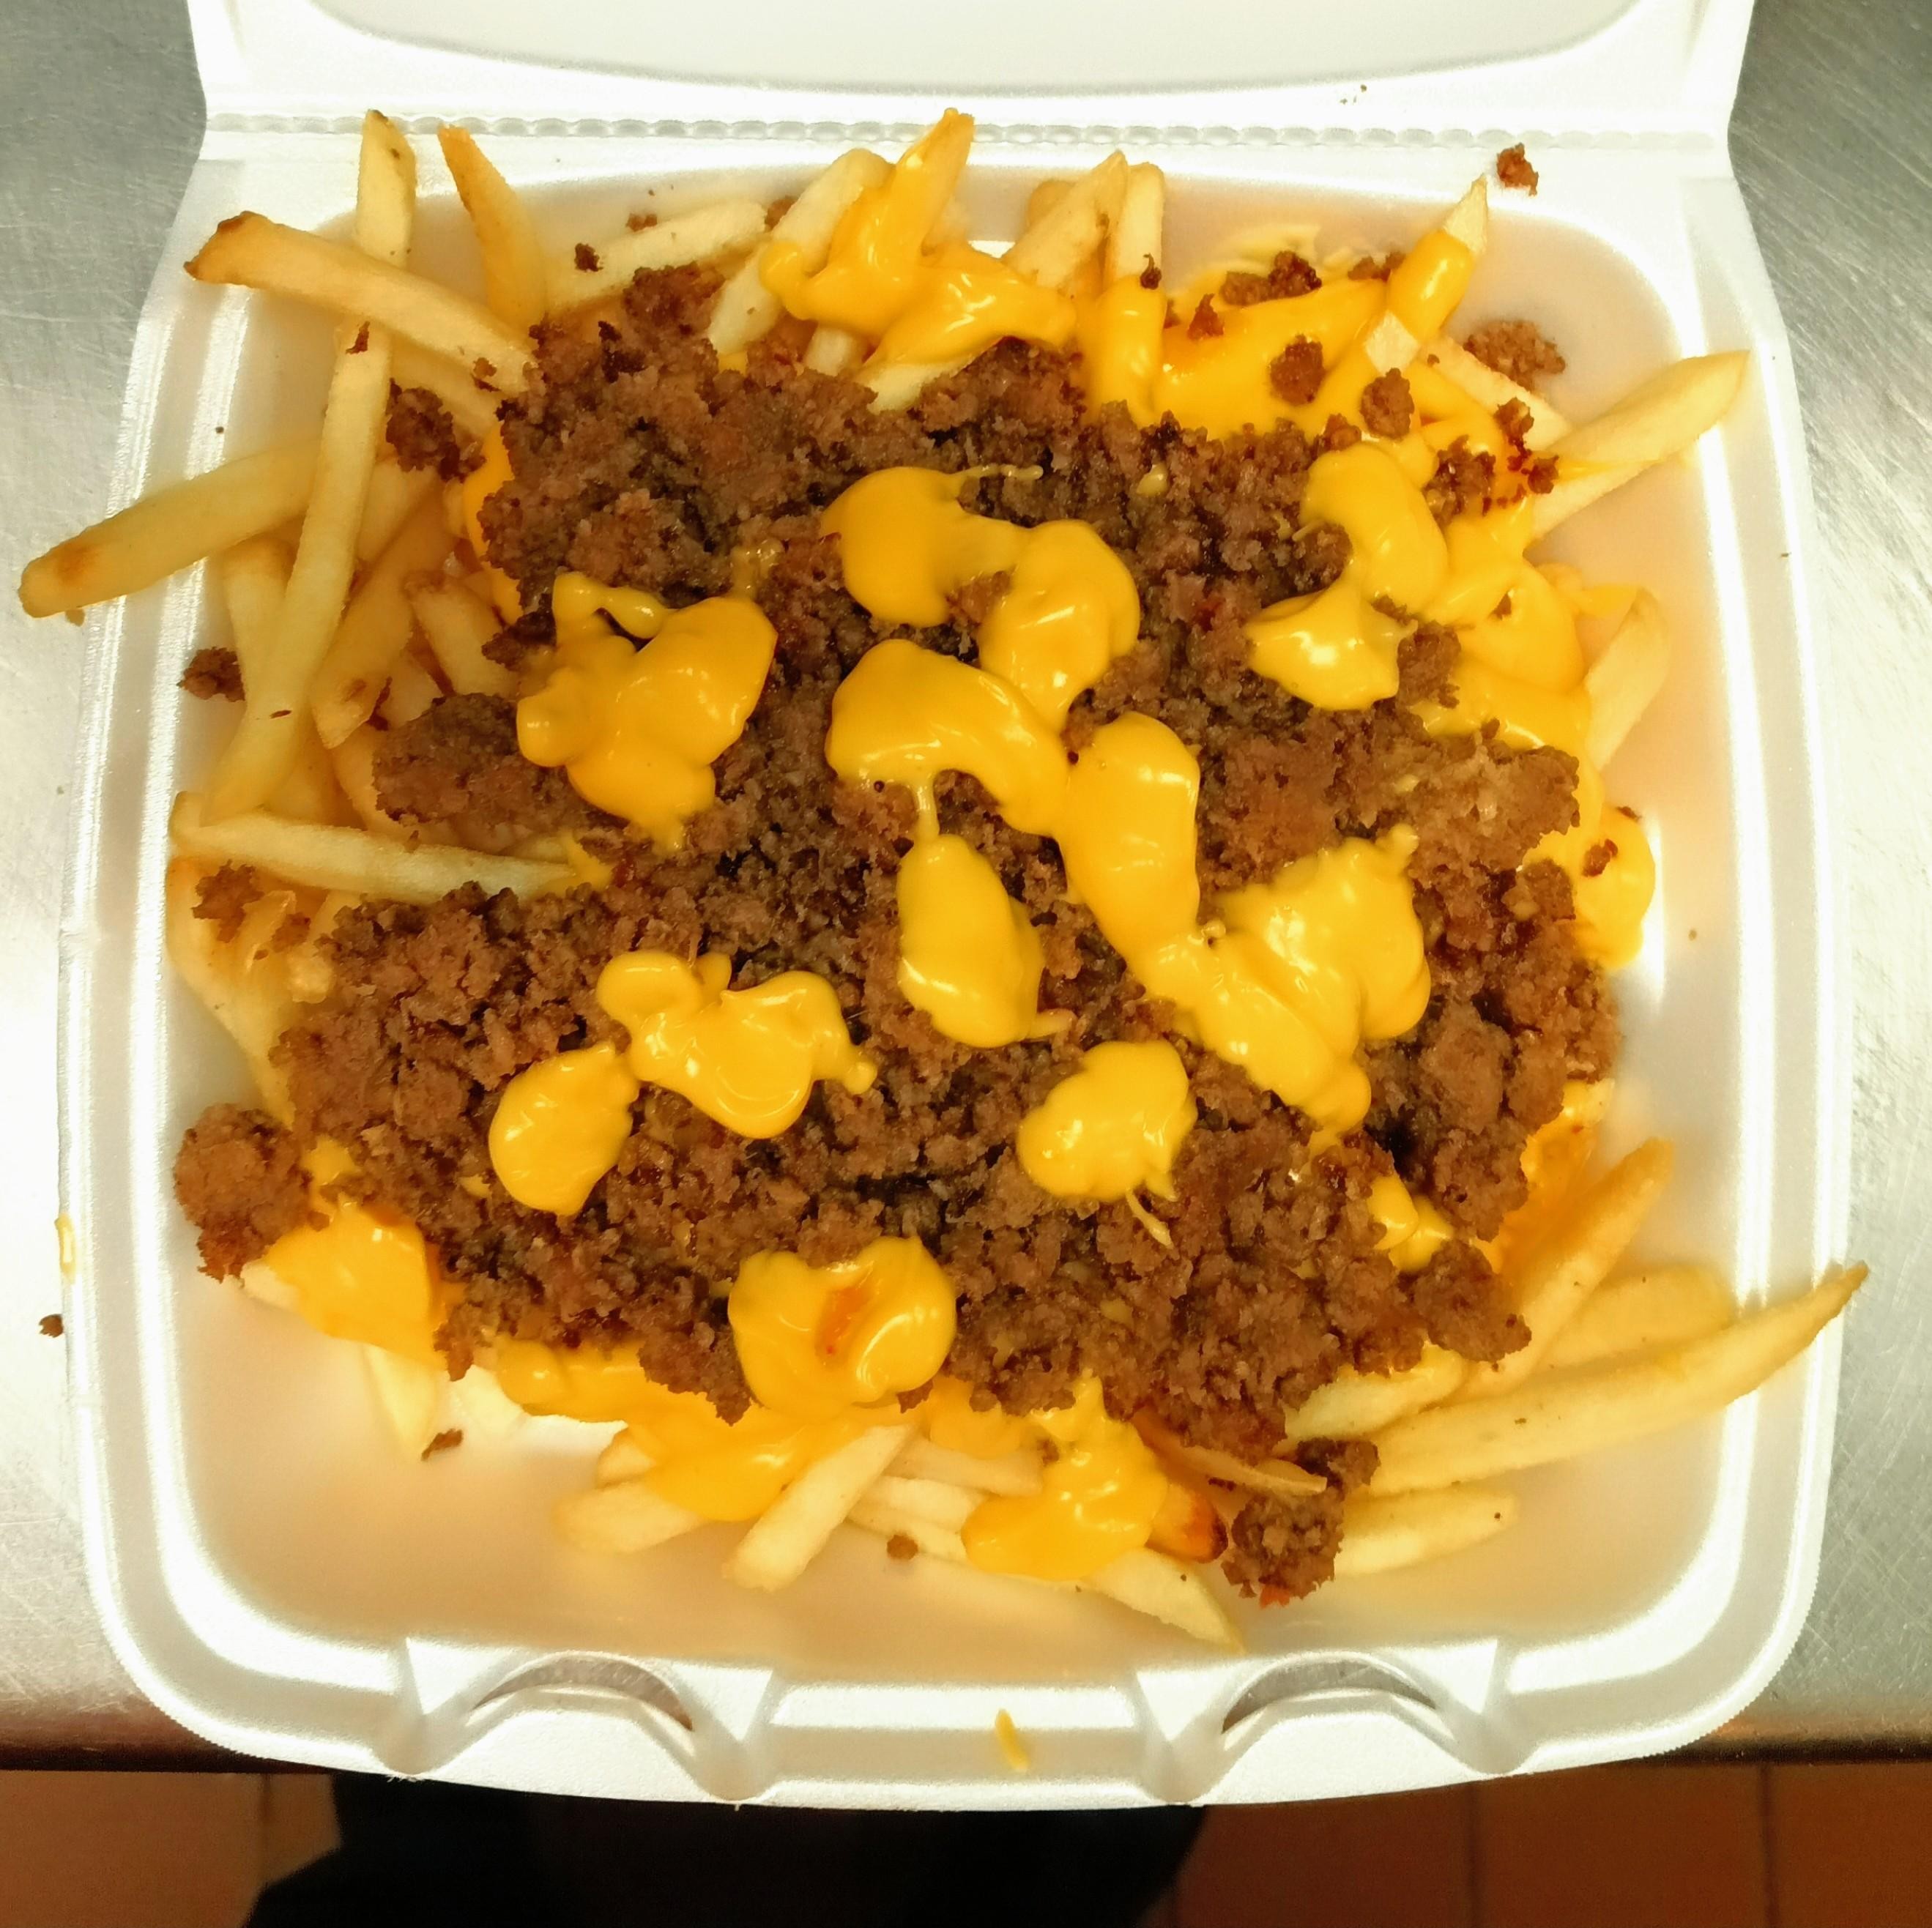 LARGE TACO CHEESE FRIES